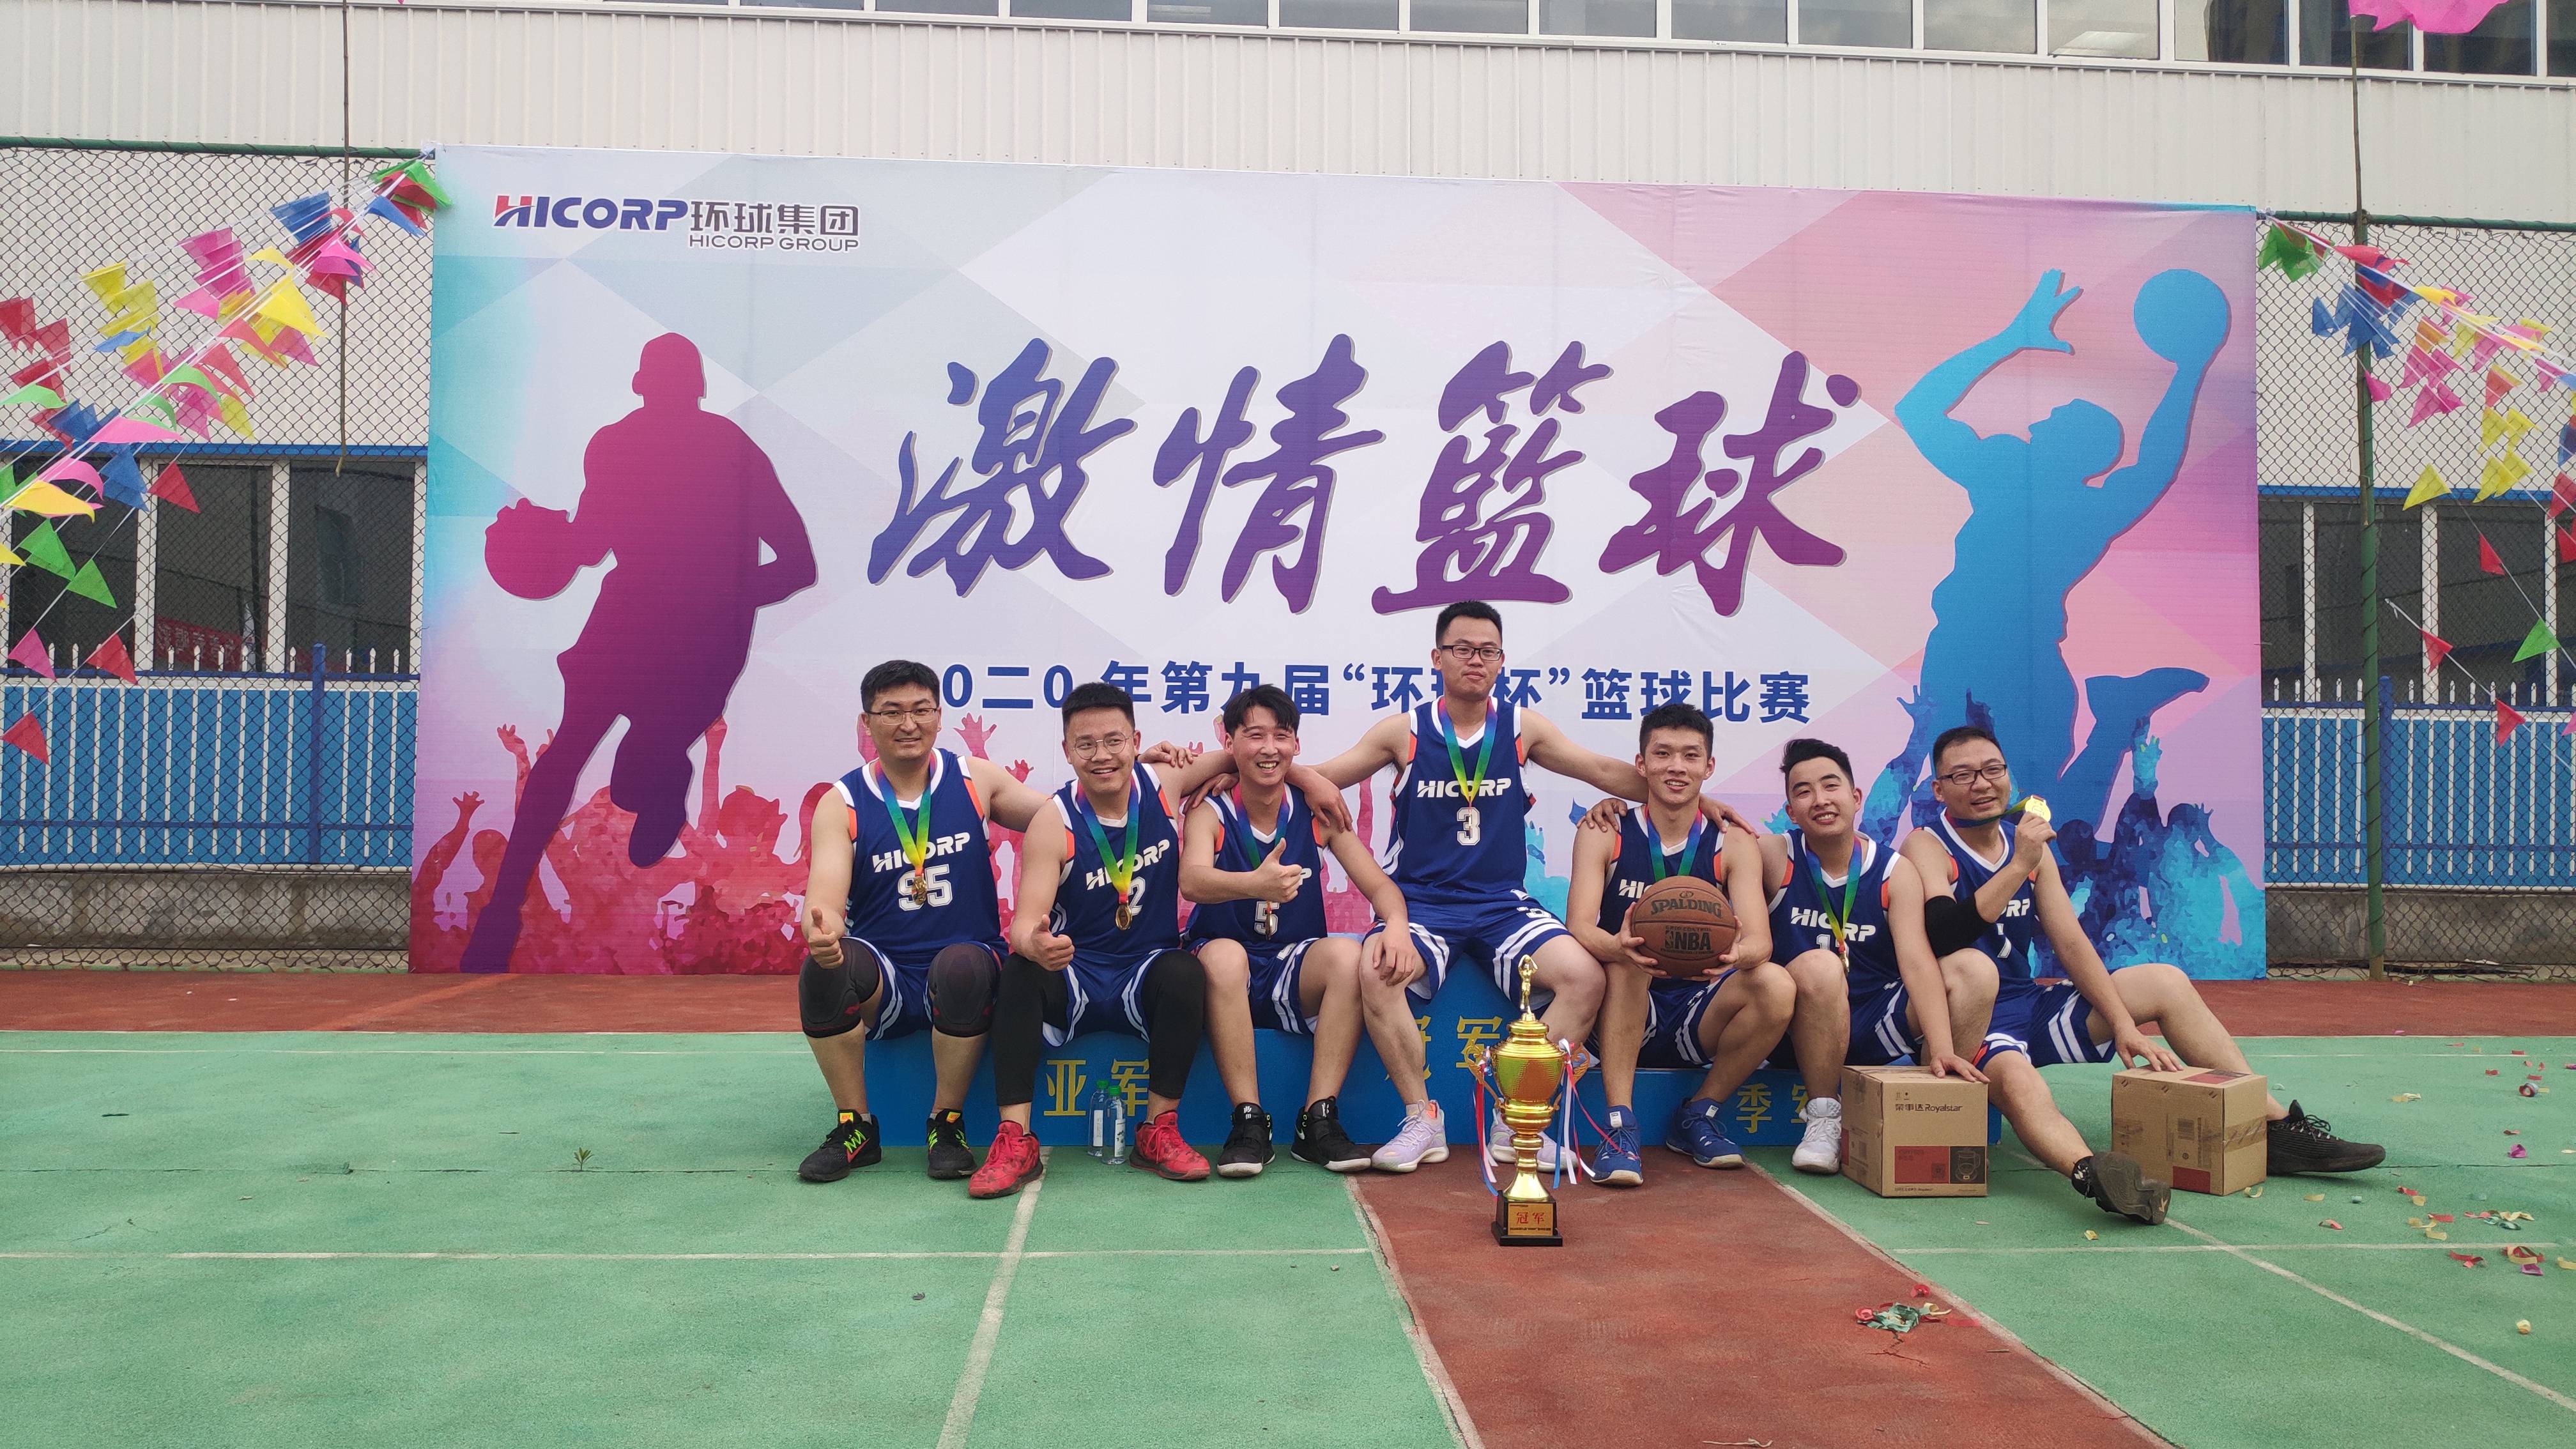 Hicorp Heavy Industry Basketball Team Wins “Hicorp Cup”